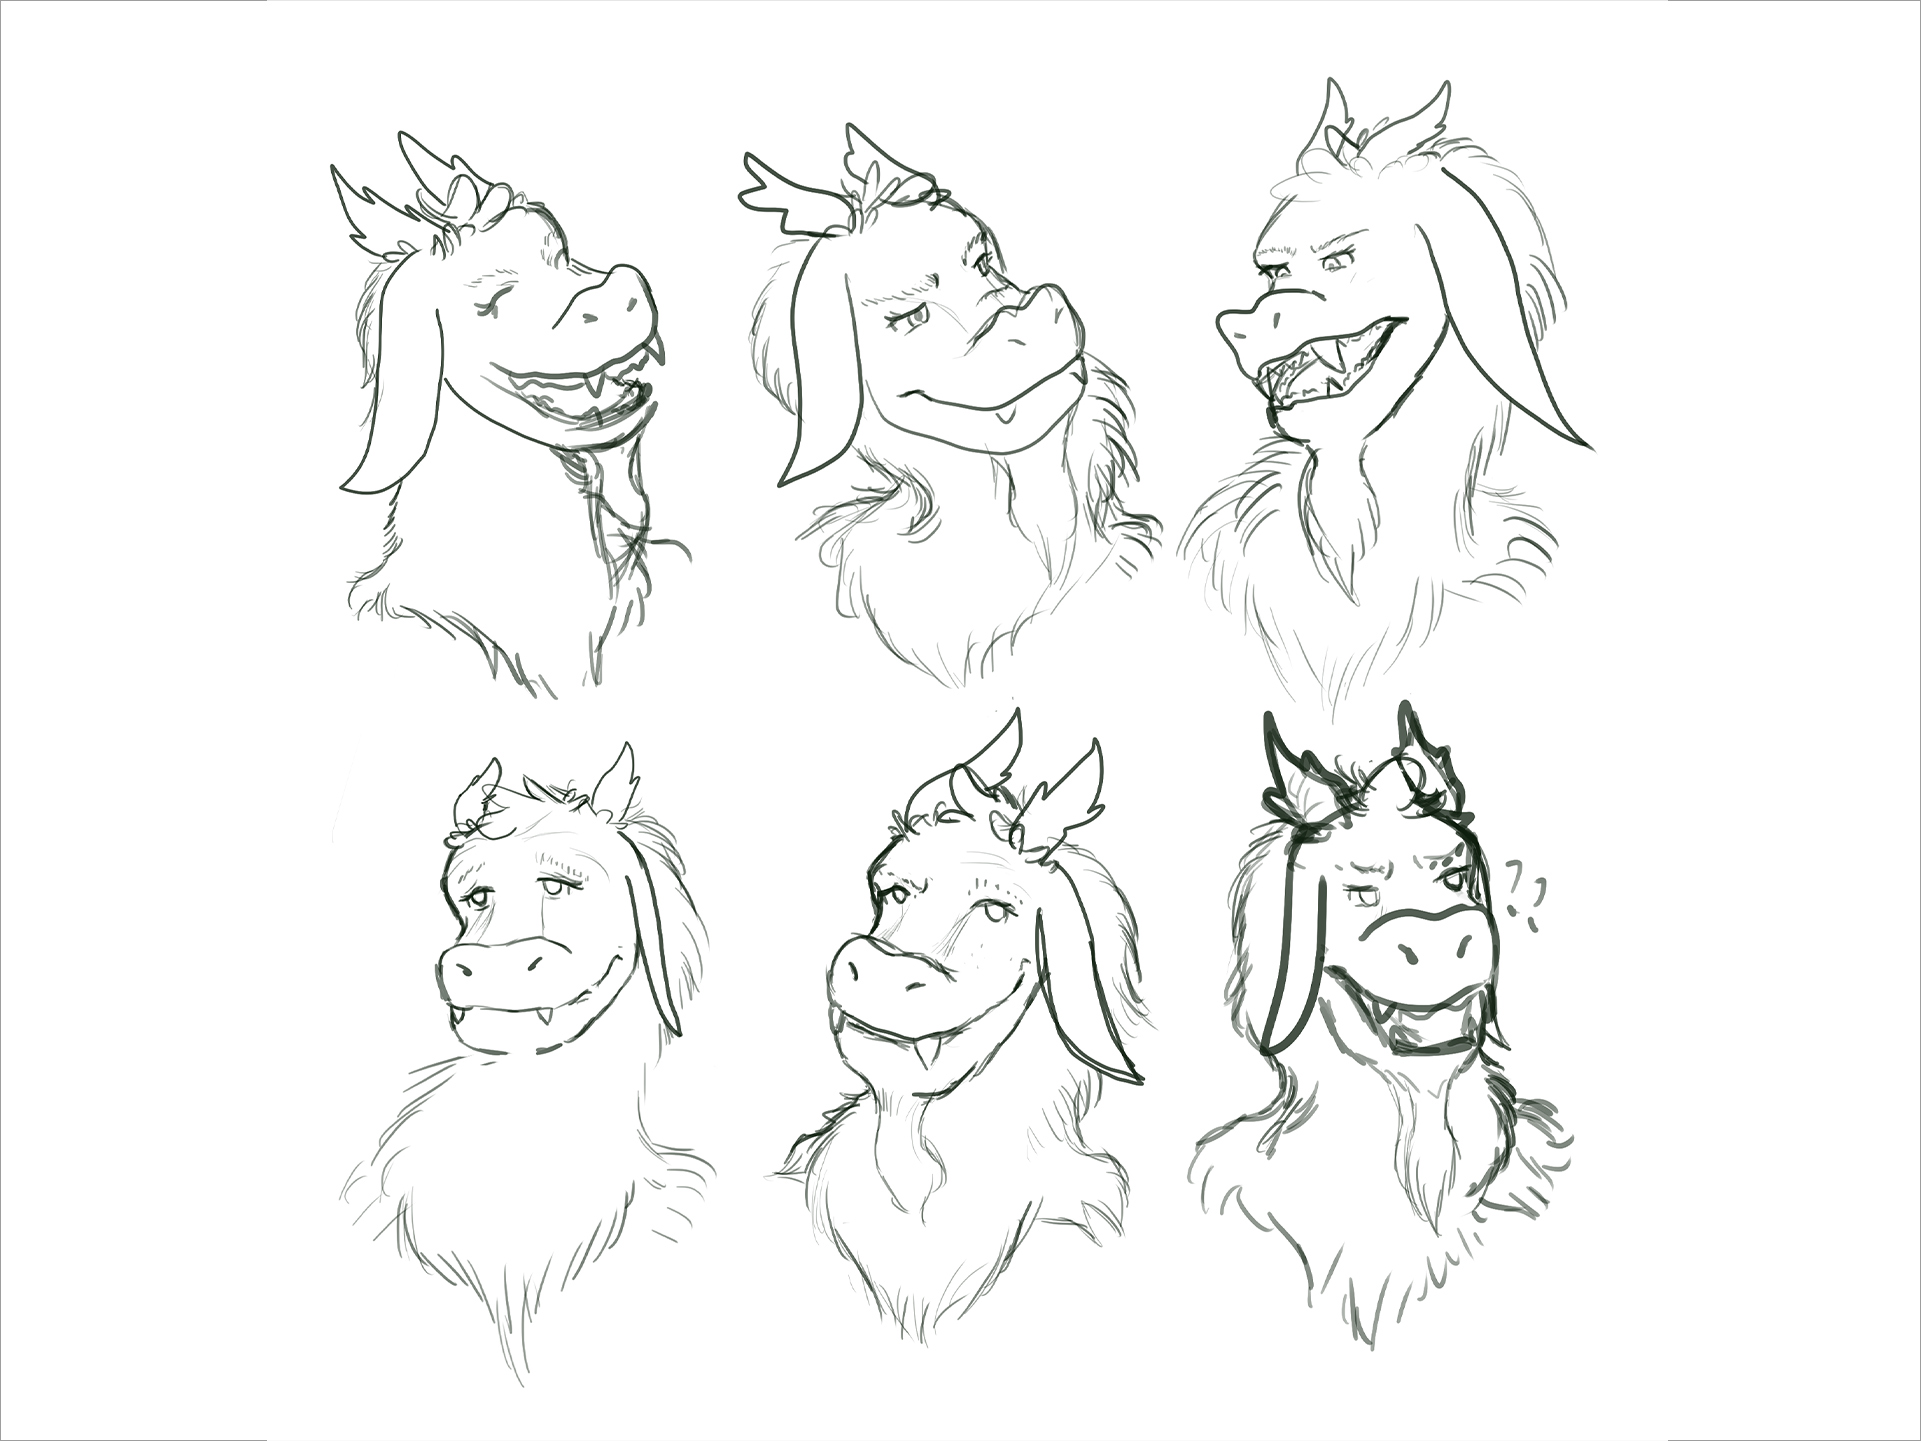 This is a simple expression sheet for the character. We see several expressions, {list them here}. Each expression also plays with the idea of how flexible this character's neck might be.